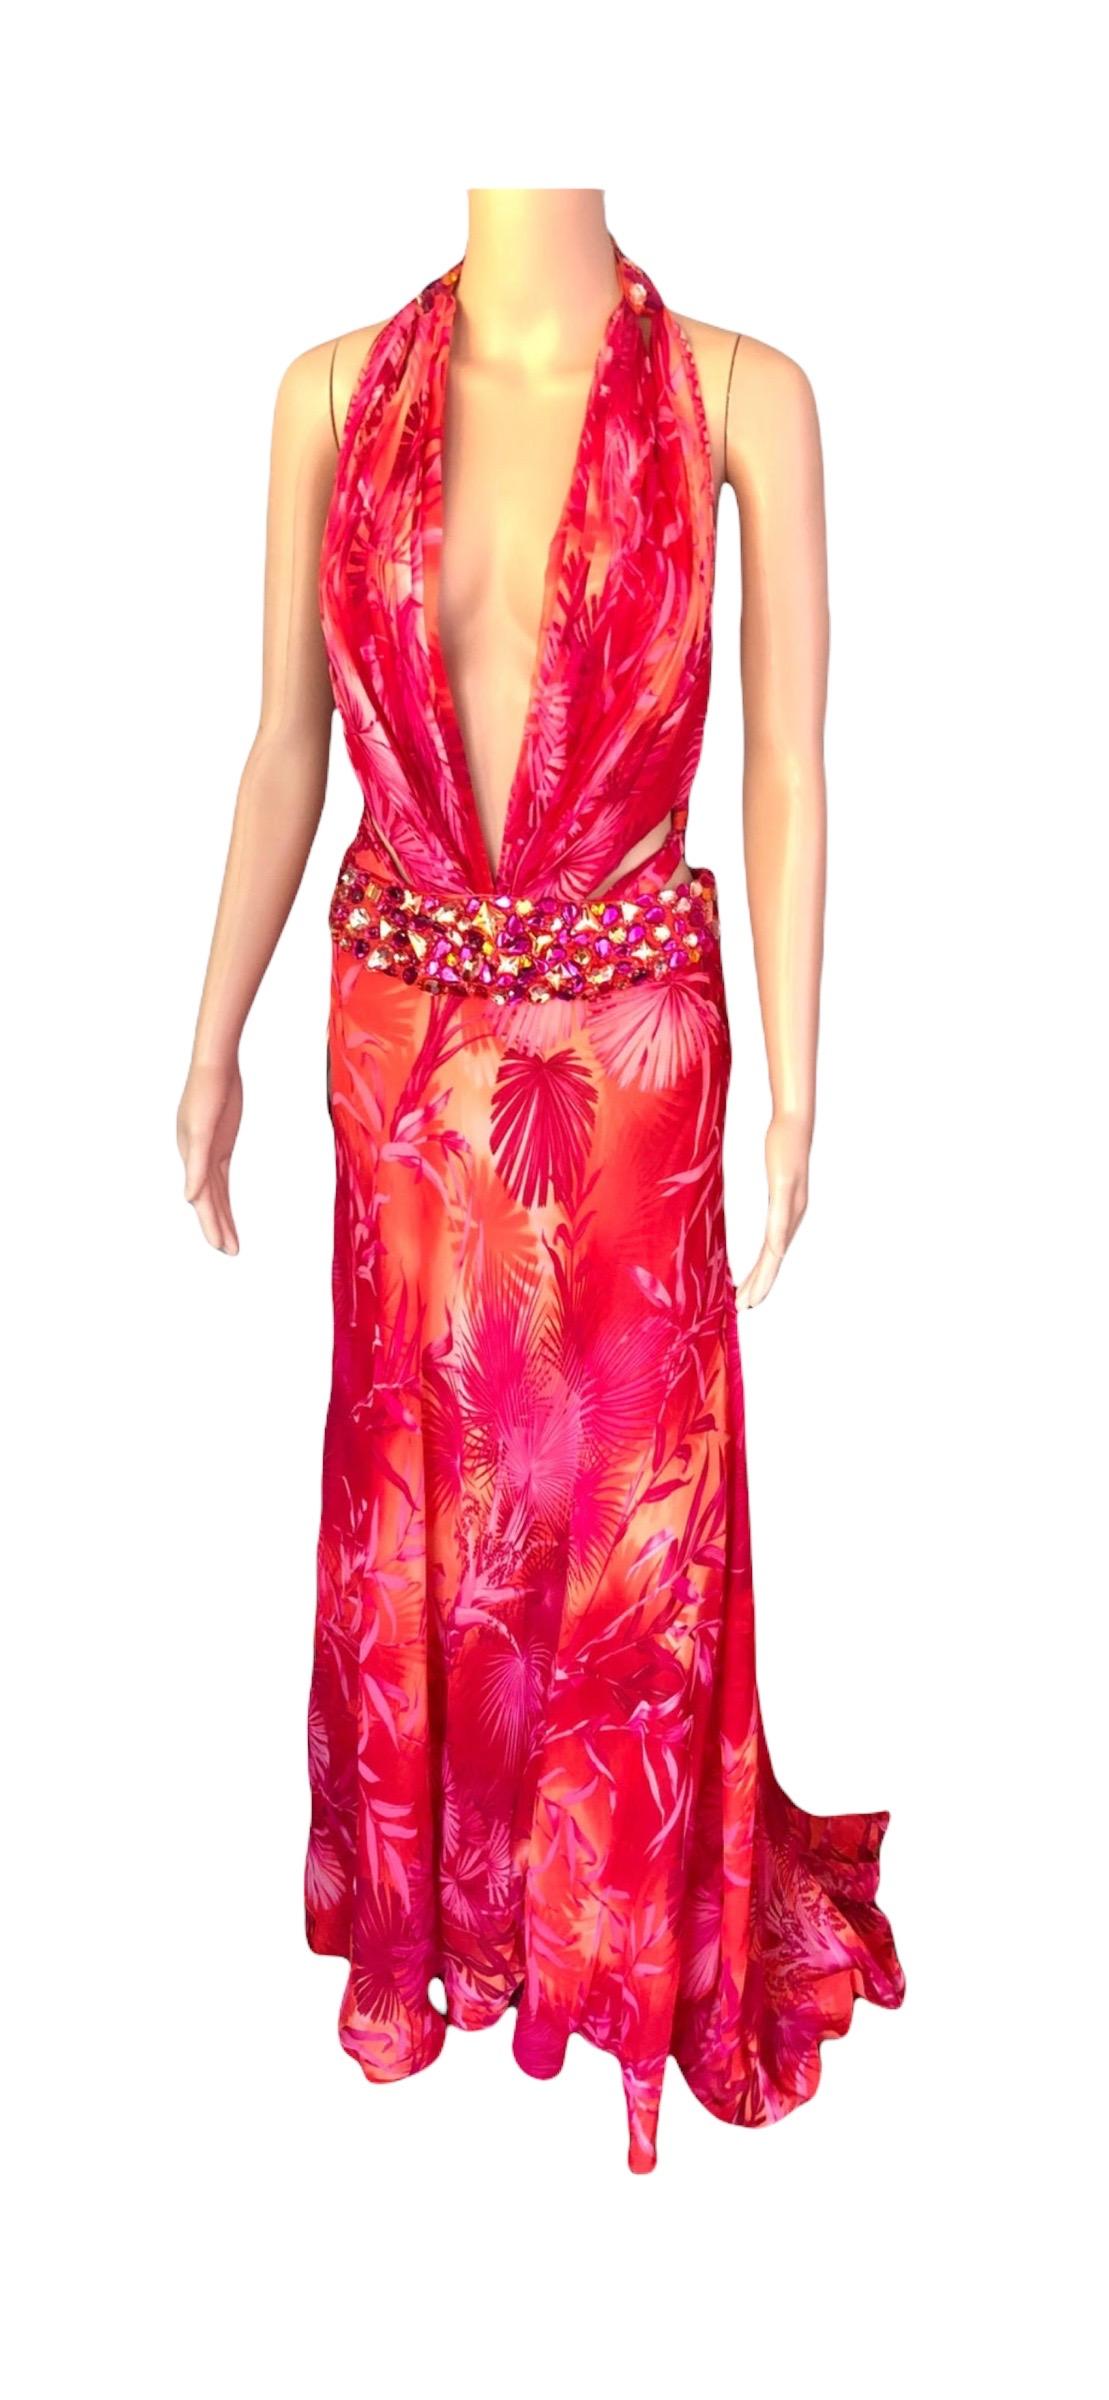 Gianni Versace S/S 2000 Runway Embellished Jungle Print Evening Dress Gown For Sale 9